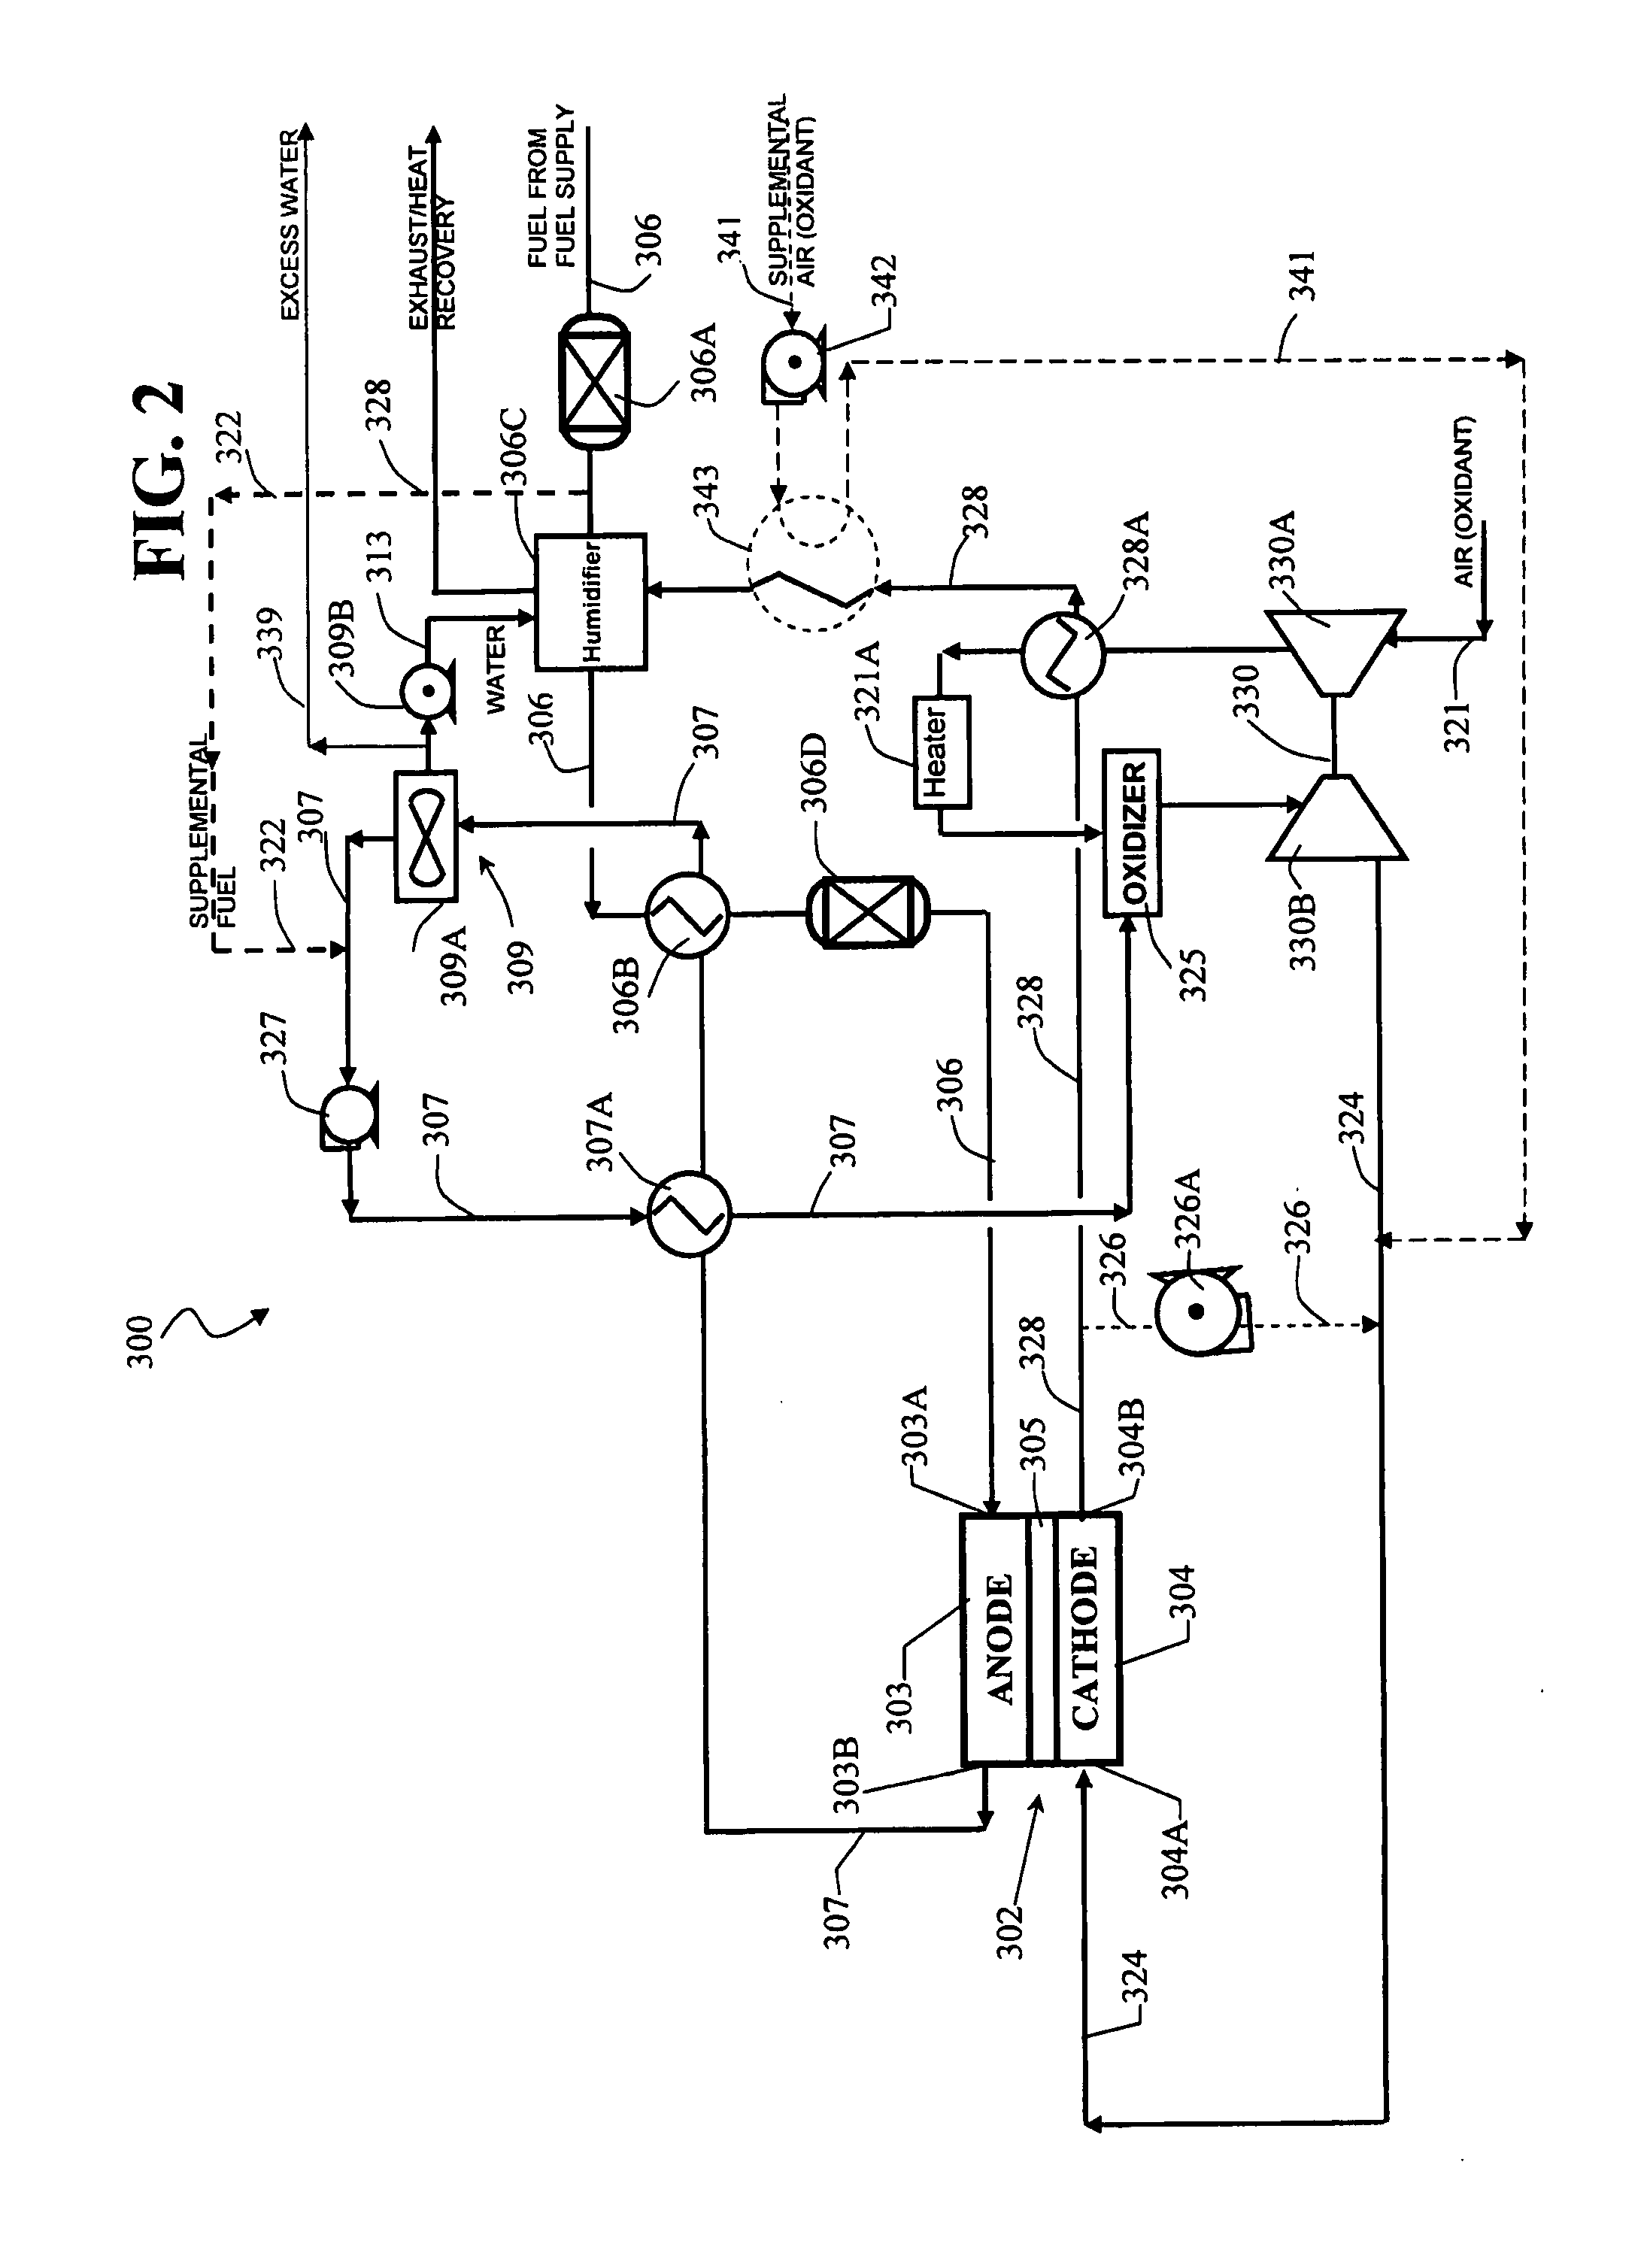 Integrated fuel cell and heat engine hybrid system for high efficiency power generation